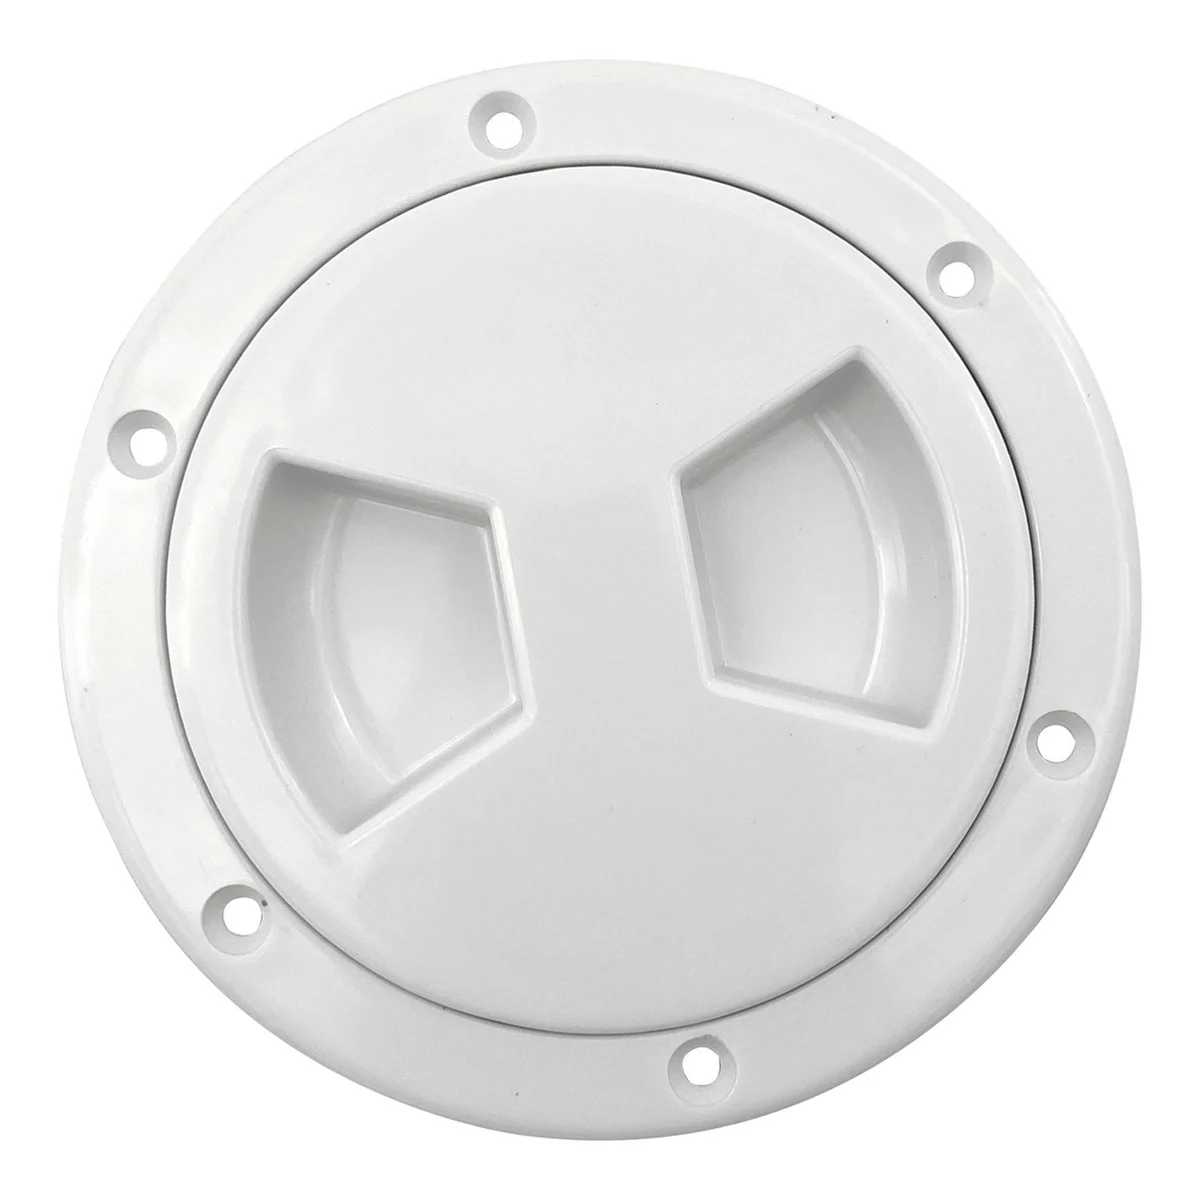 

4in Marine Round Inspection Deck Plate Hatch with Detachable Smooth Center, Water Tight for Outdoor Installations,